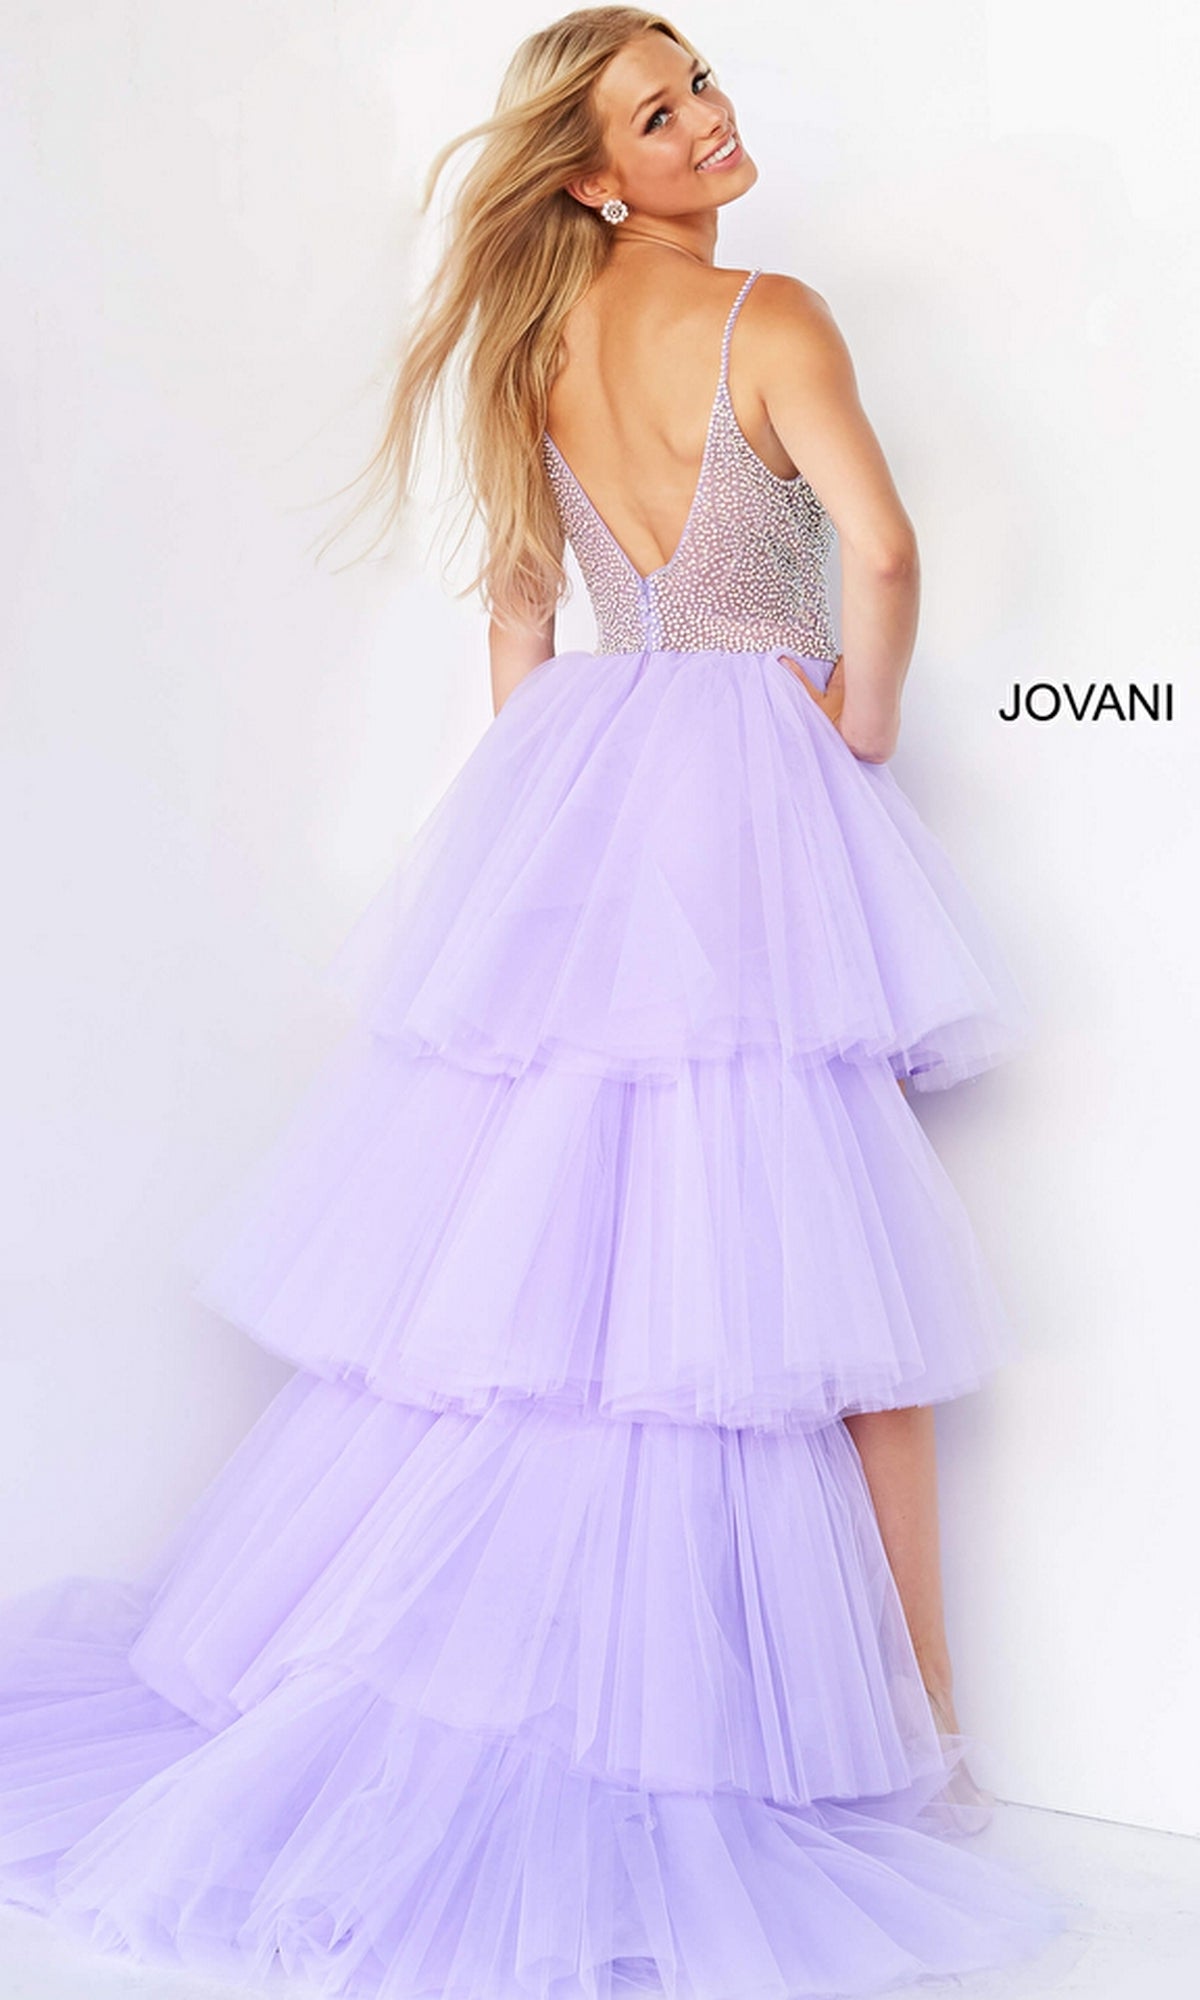 Sheer-Bodice High-Low Prom Dress 07231 by Jovani